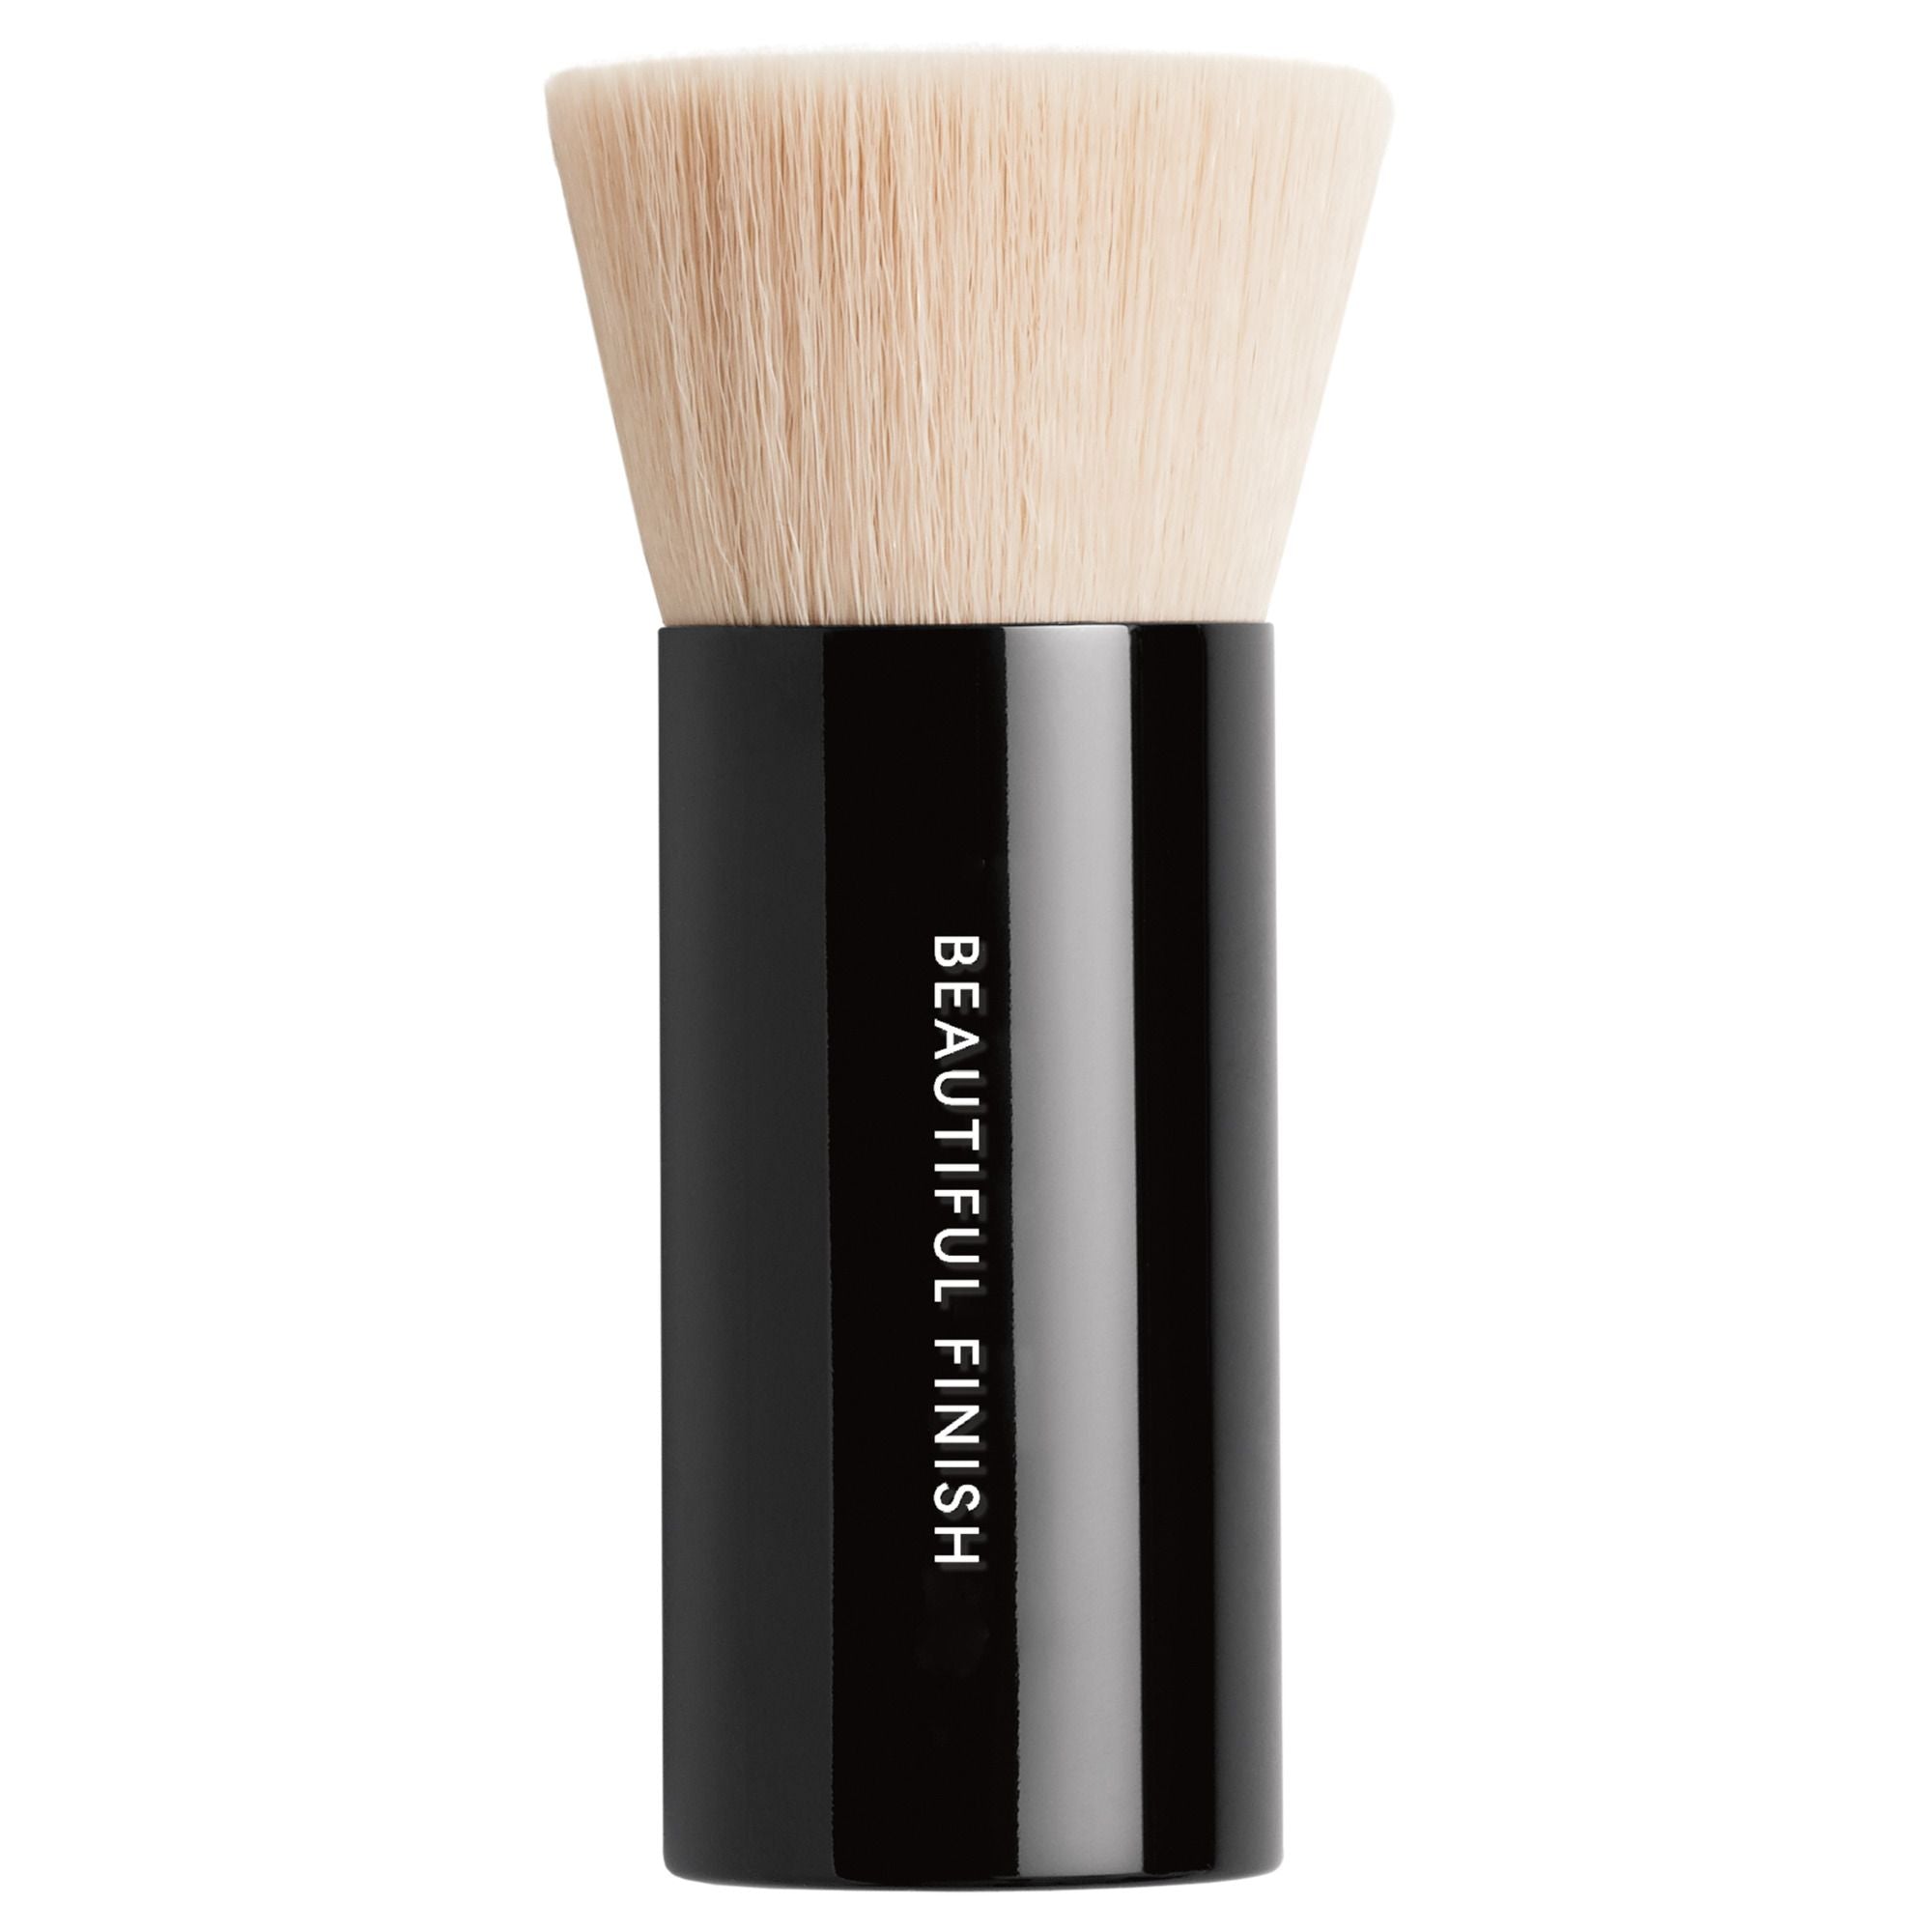 Powder Brush - Mineral Foundation Brush, Real Techniques